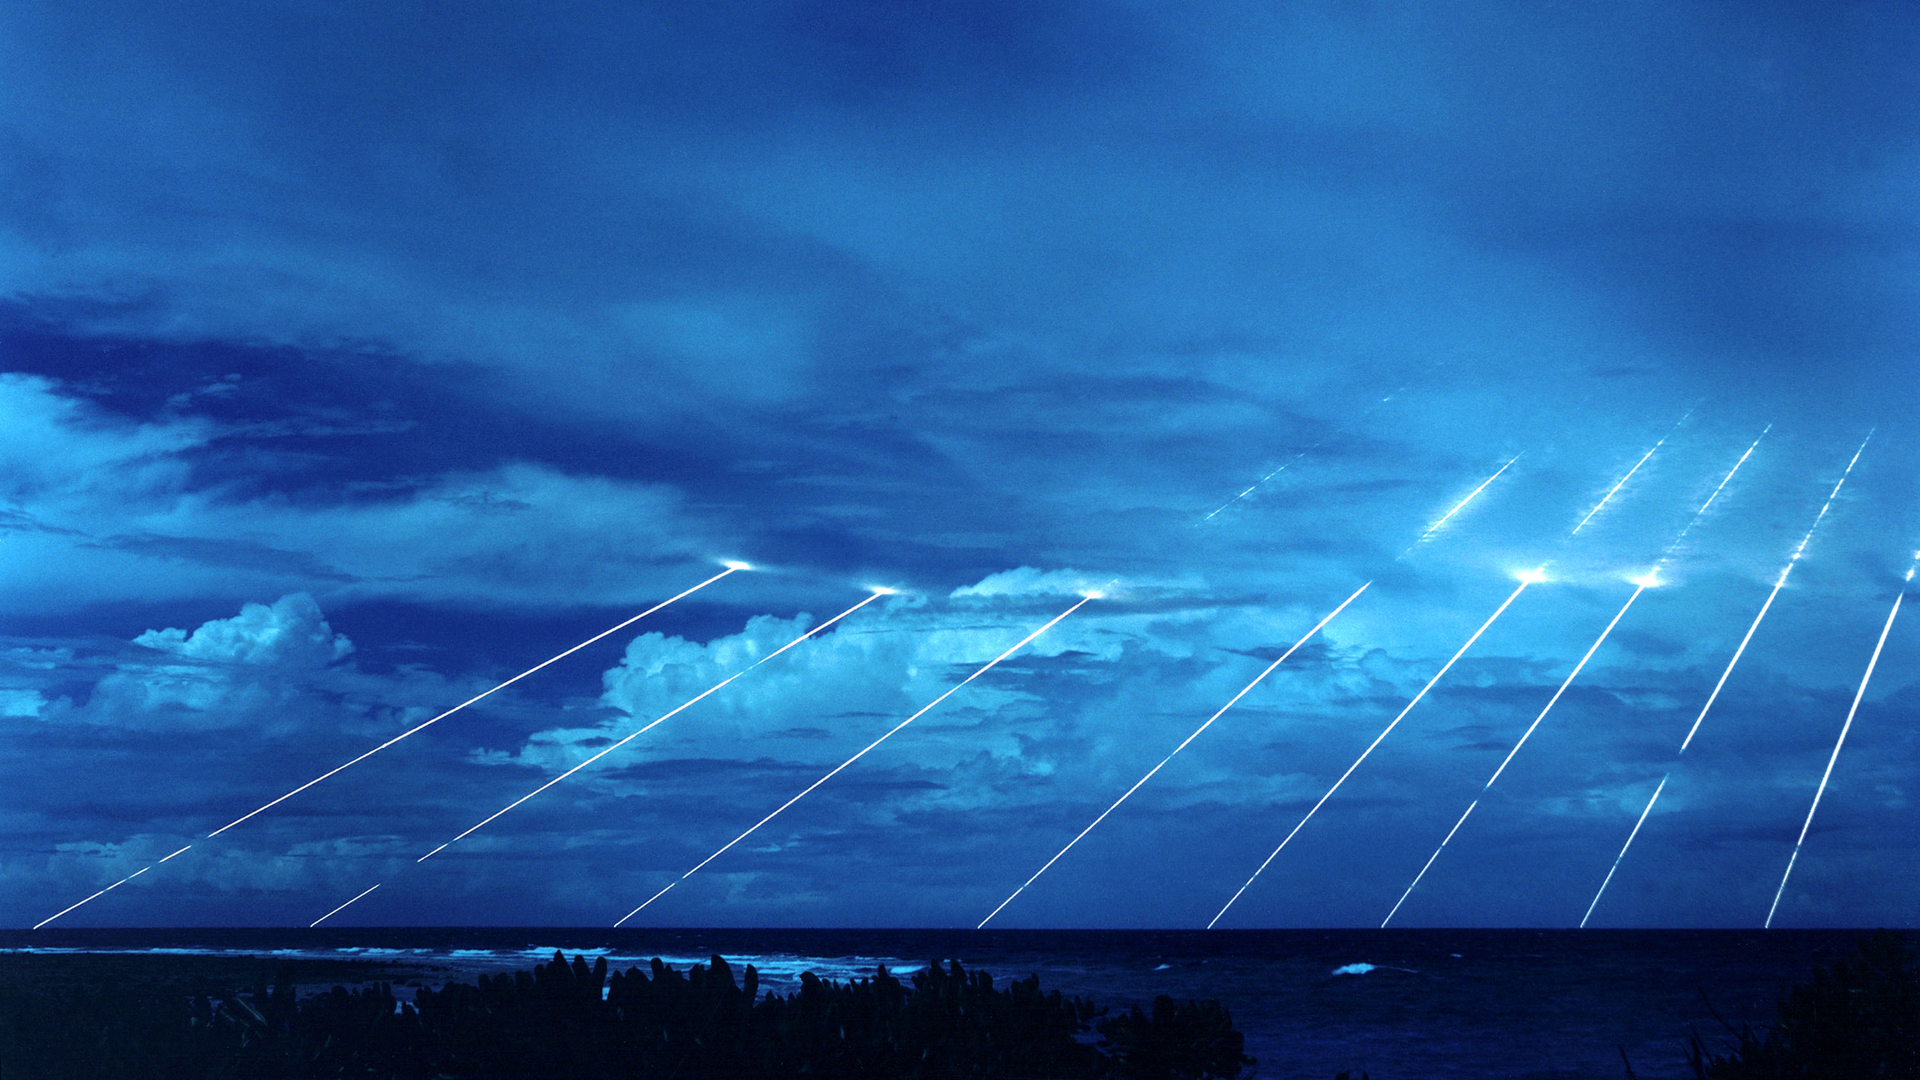 General 1920x1080 clouds sea missiles lights blue ICBM military lines sky long exposure nuclear